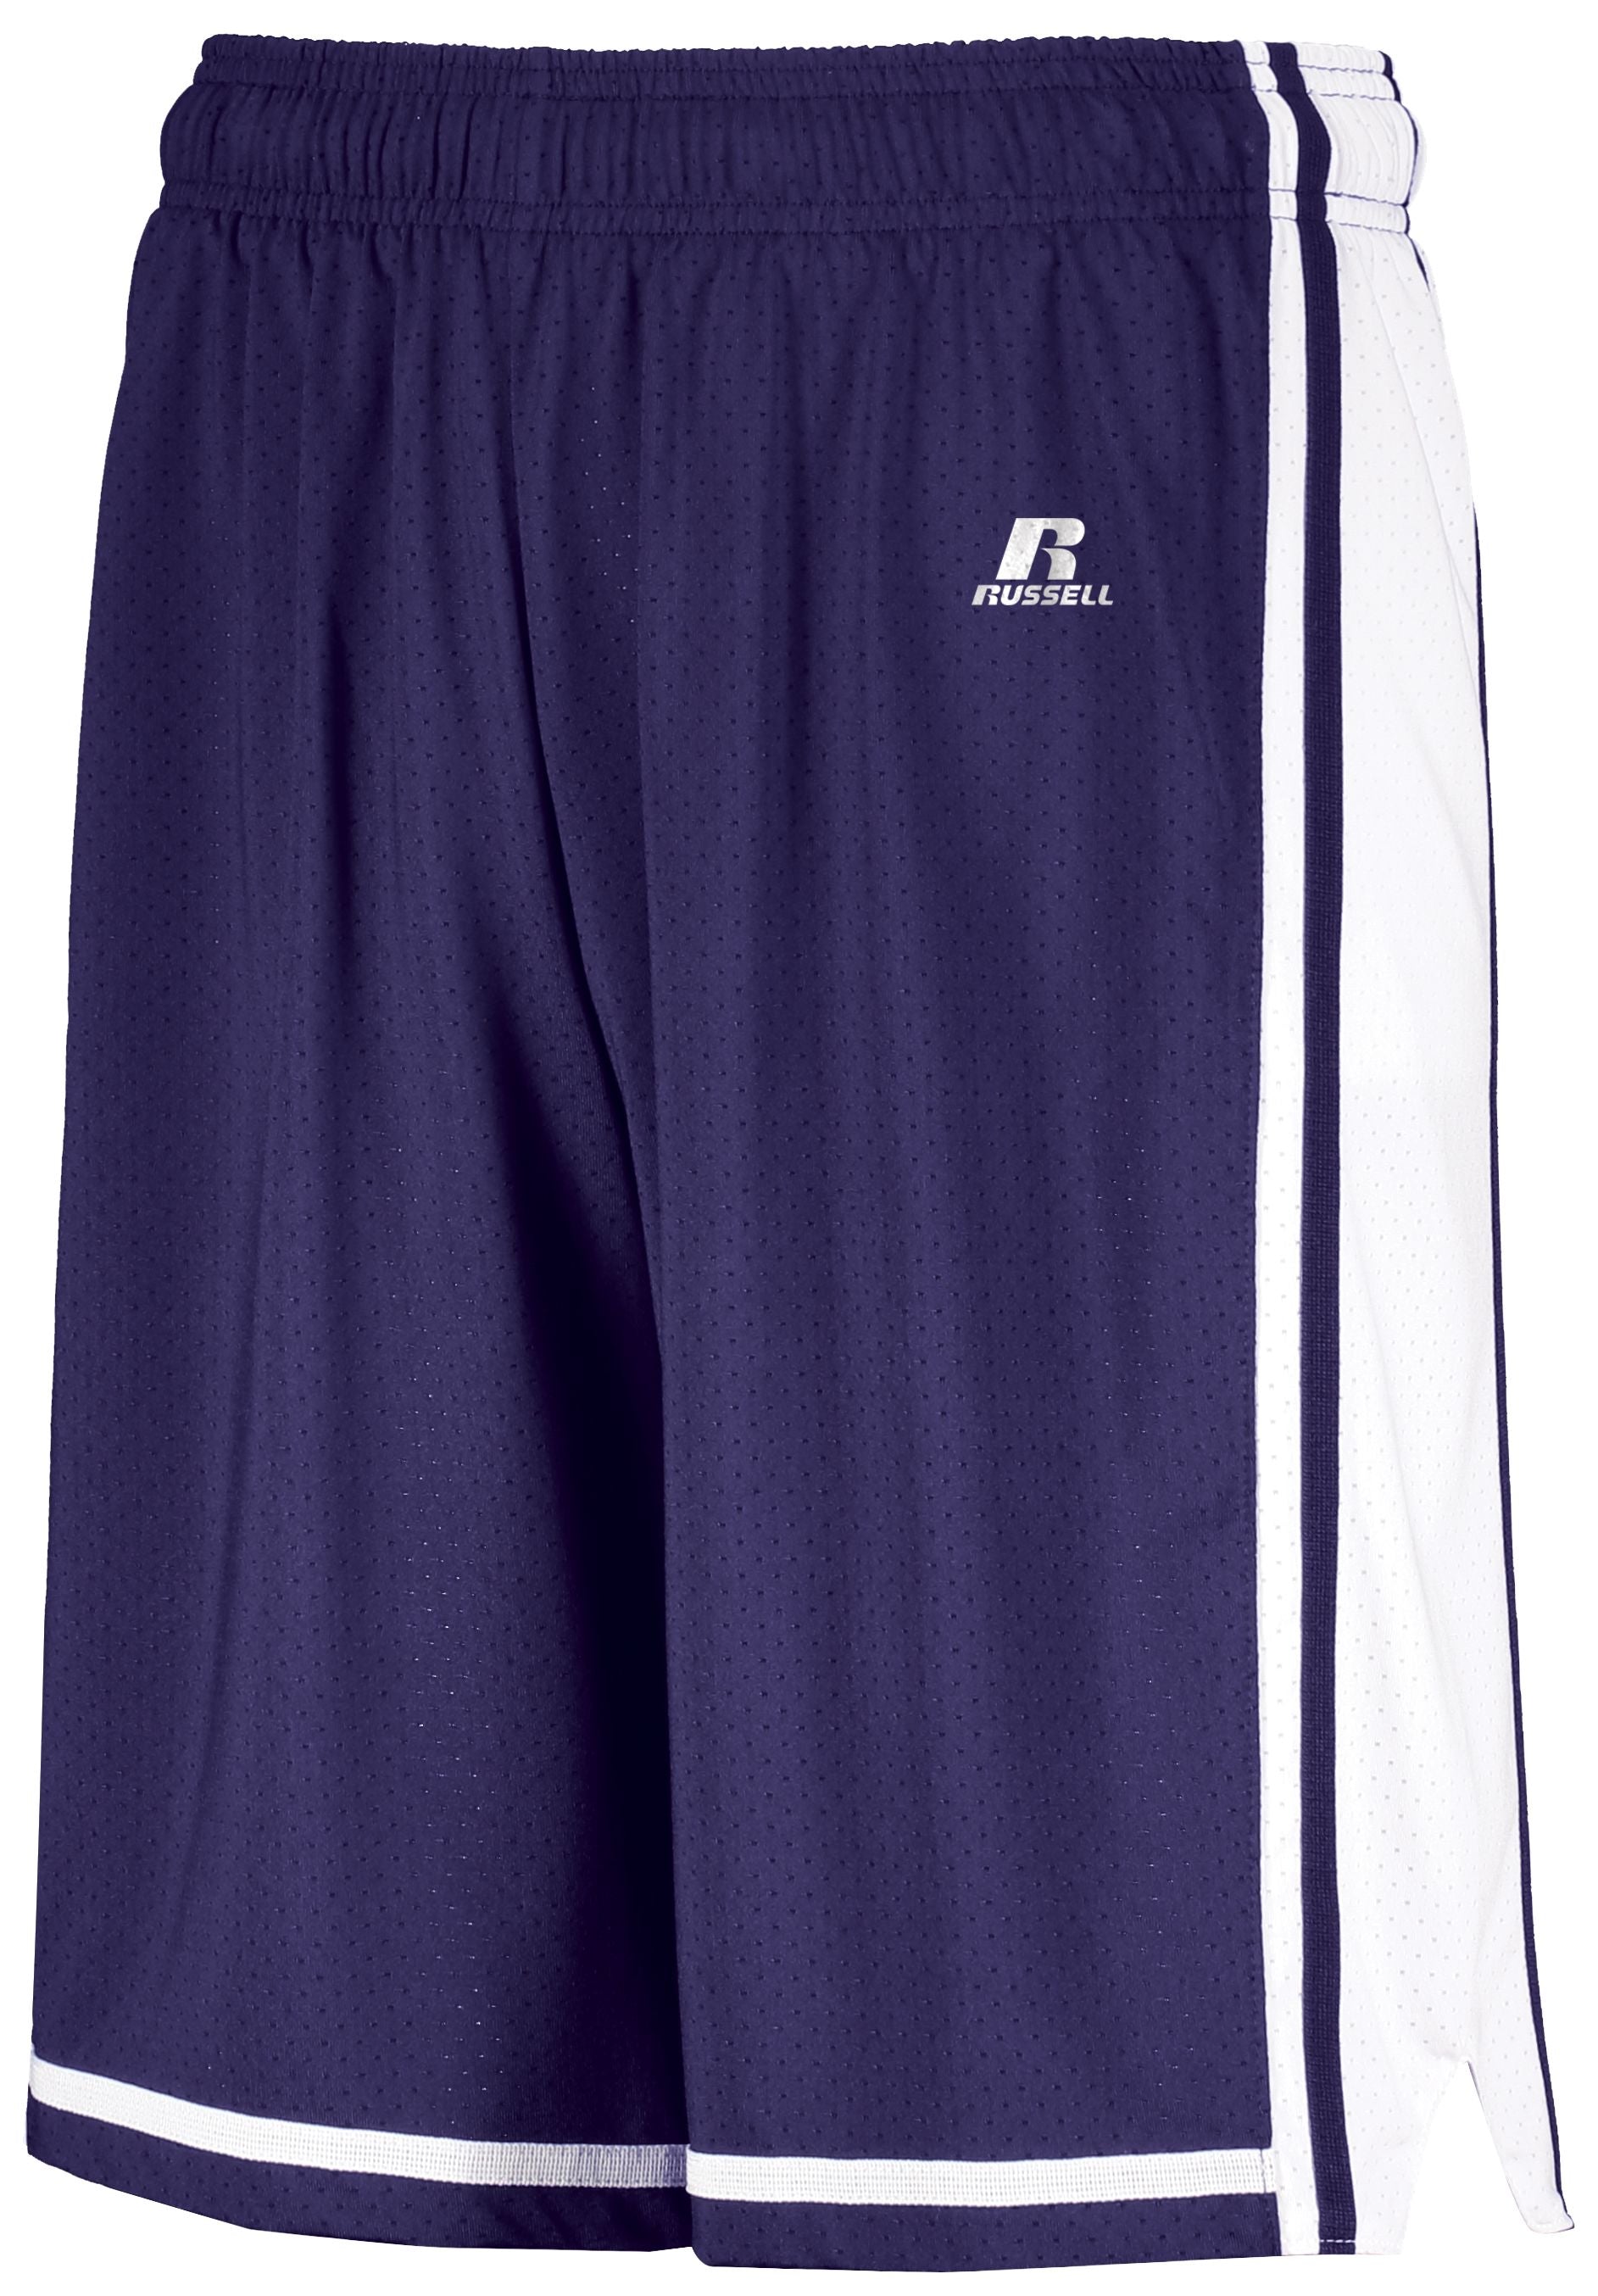 Russell Athletic Legacy Basketball Shorts in Purple/White  -Part of the Adult, Adult-Shorts, Basketball, Russell-Athletic-Products, All-Sports, All-Sports-1 product lines at KanaleyCreations.com